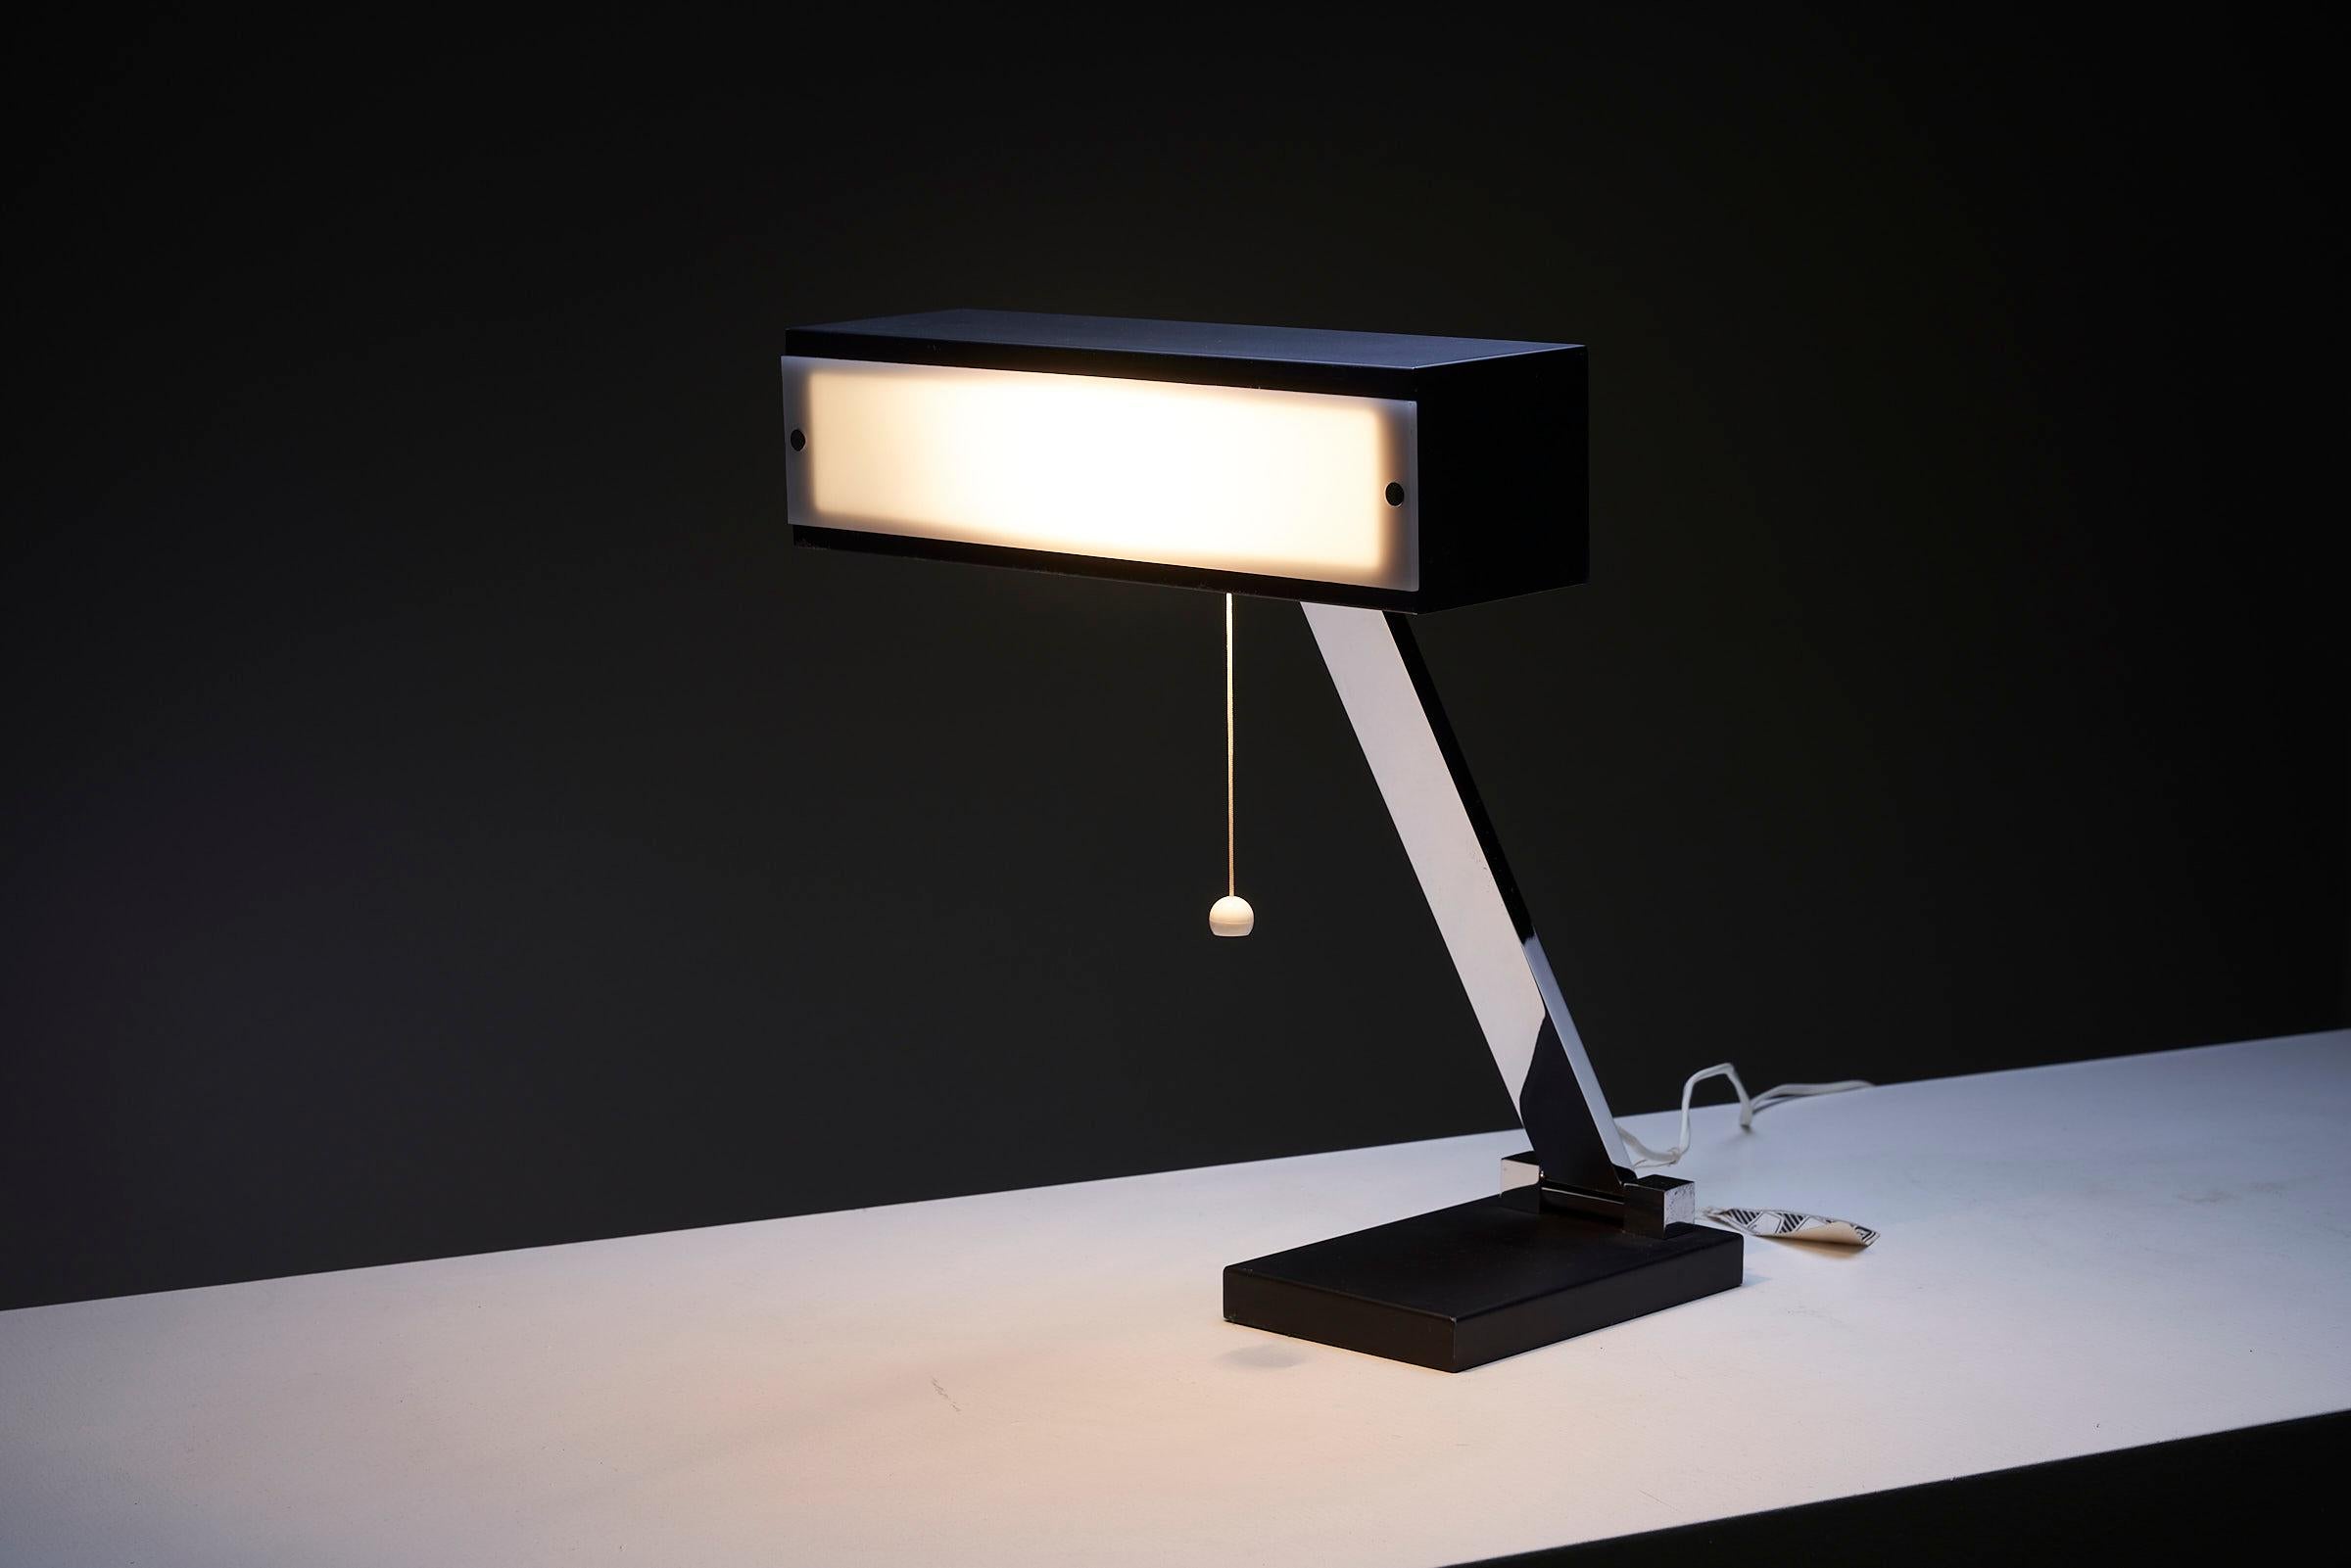 Table Lamp by Boulanger, Belgium, offers a sleek and modern lighting solution. The lamp features a black base and shade, connected by a chrome stem for added stability and visual appeal. The shade is equipped with a white plexi diffuser, allowing